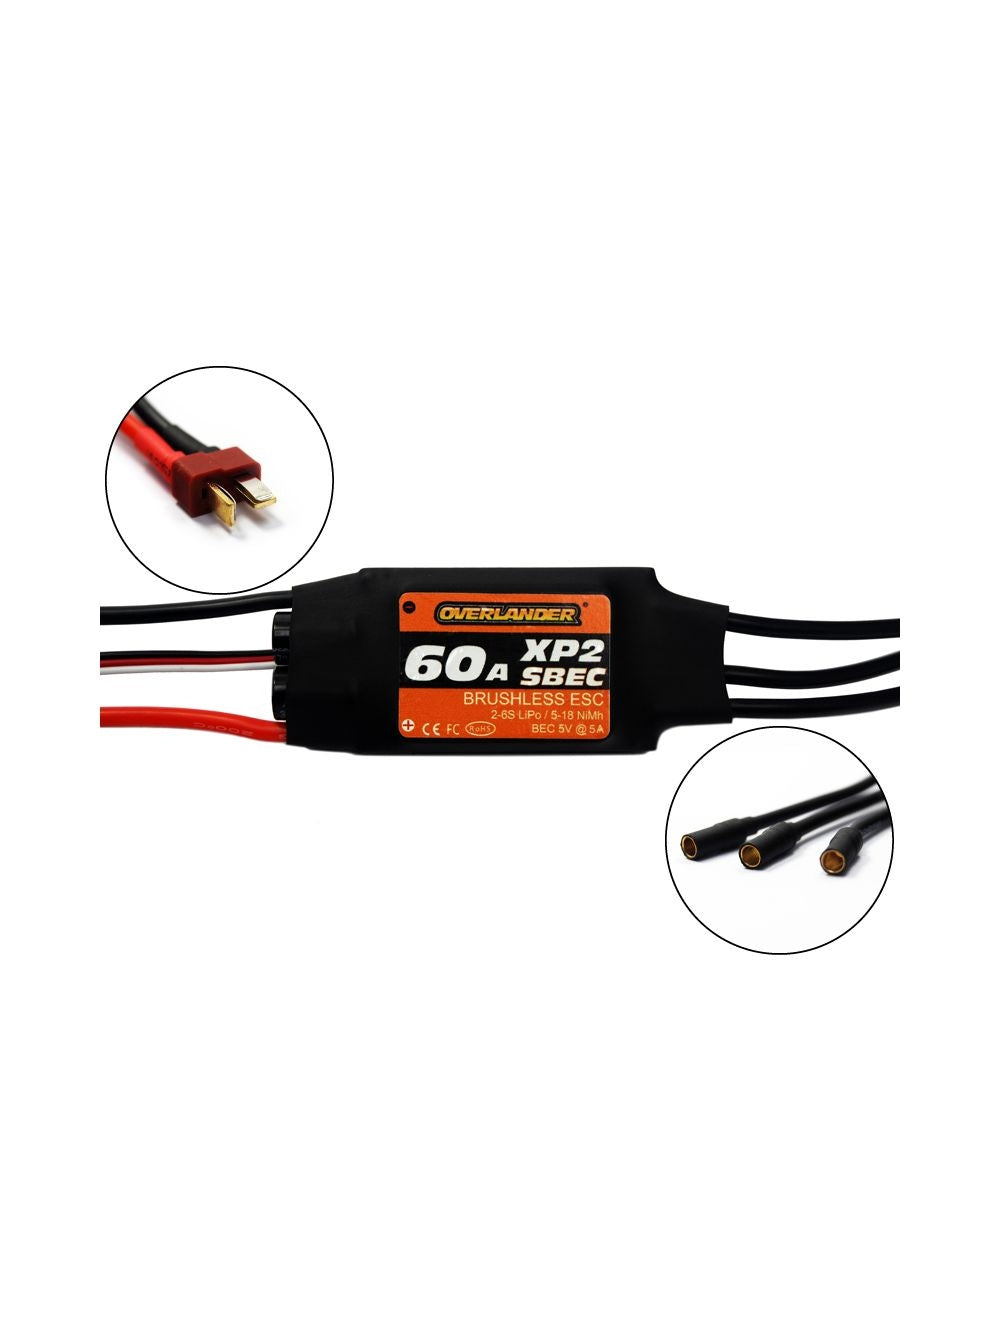 Overlander XP2 60A SBEC Brushless RTF (With Deans) Speed Controller ESC 2721